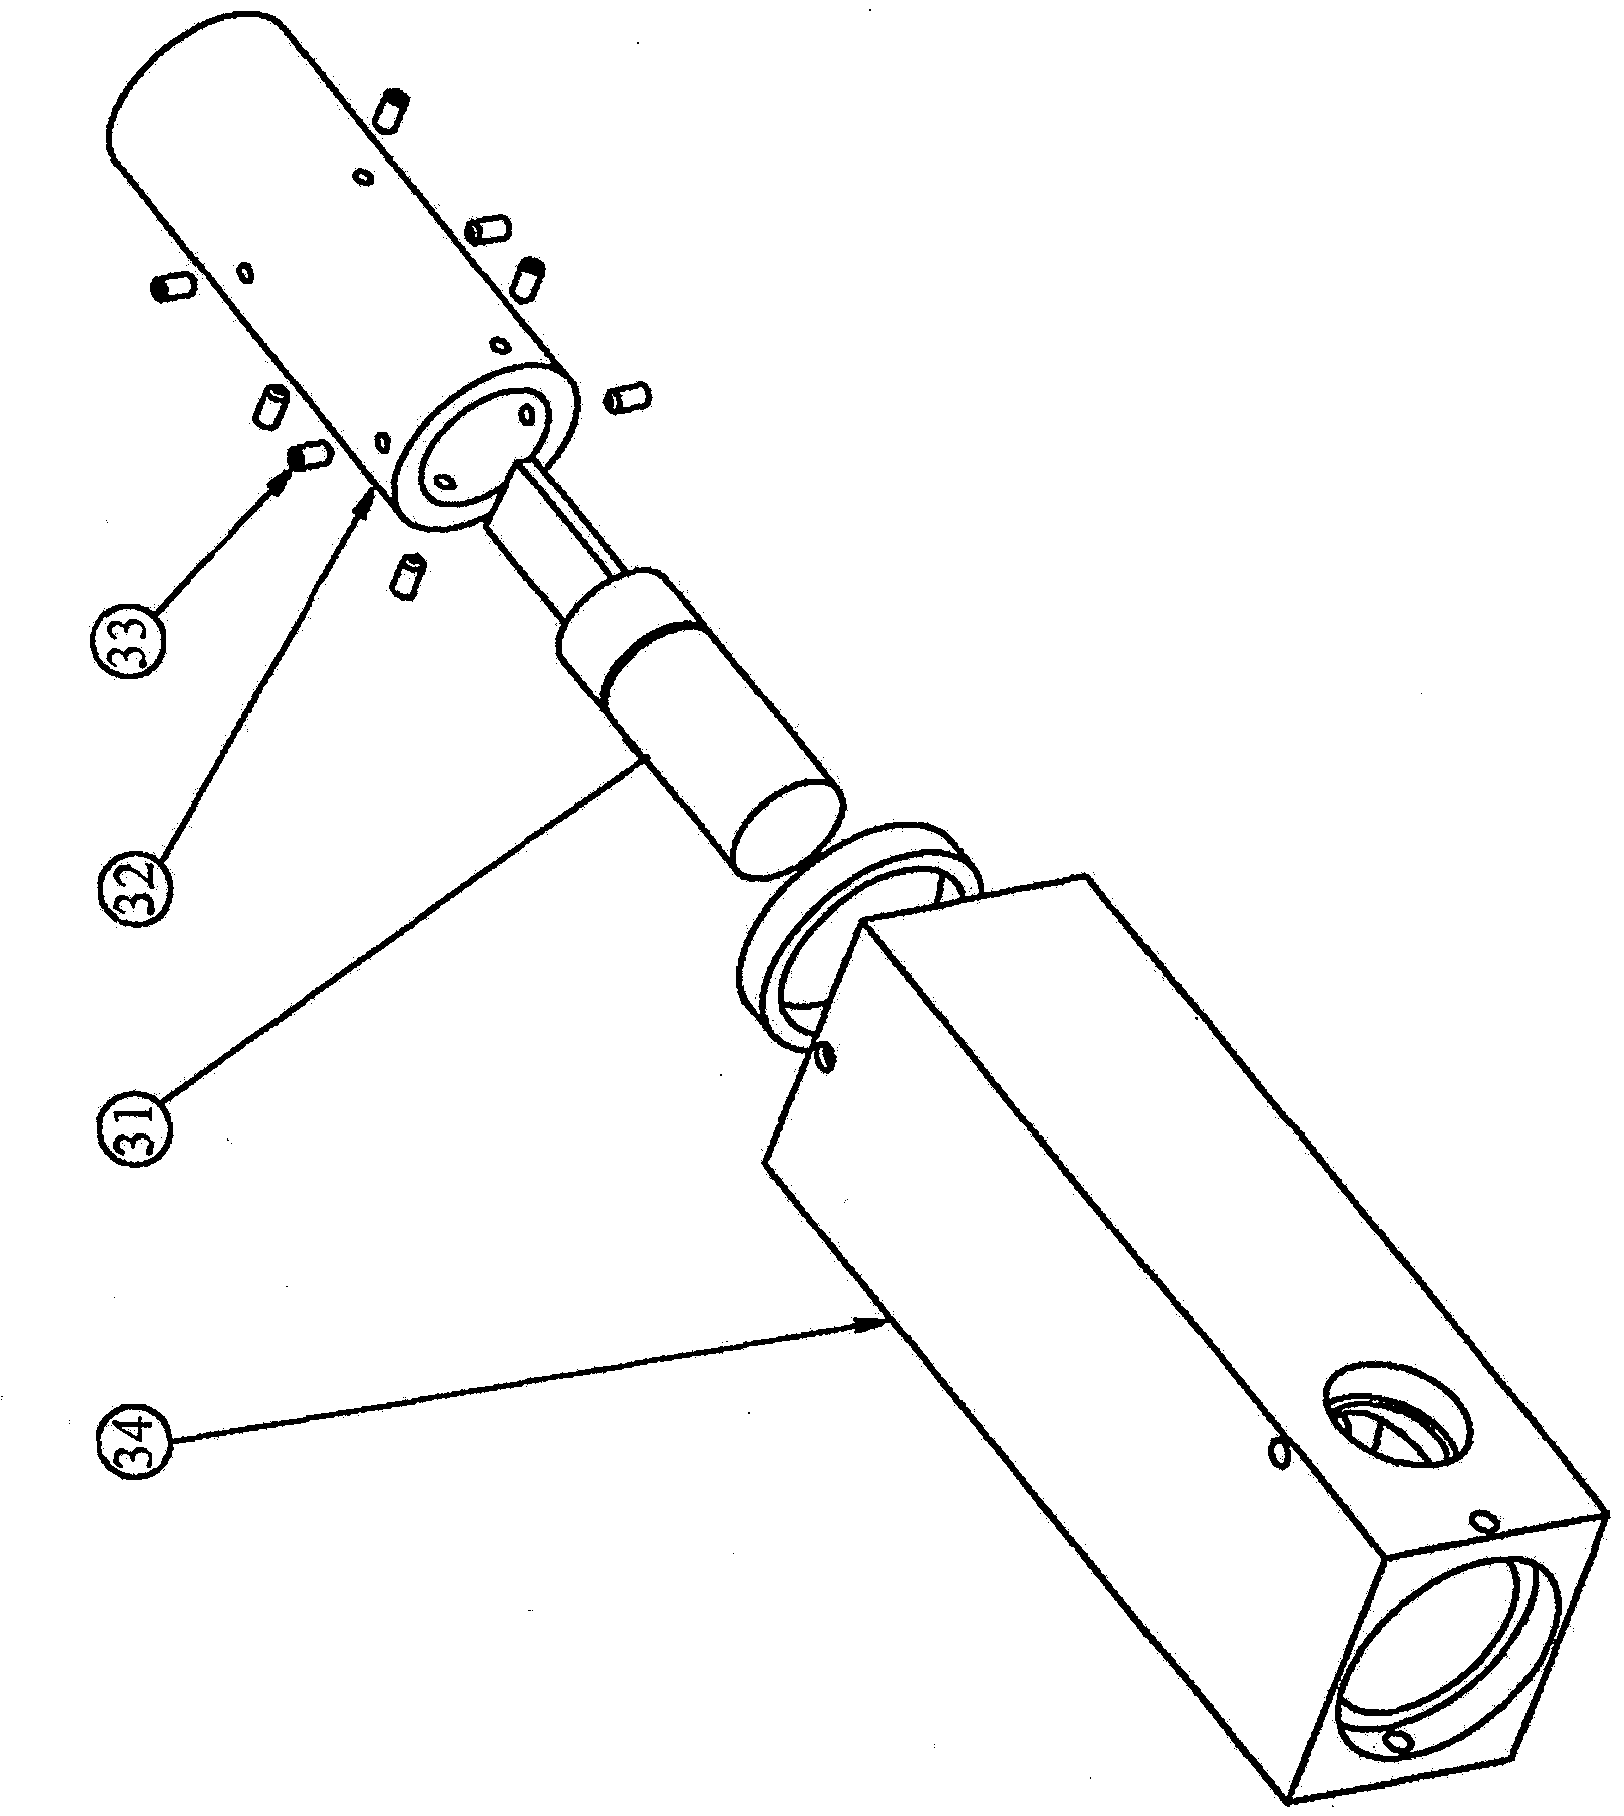 An apparatus and method for detecting raman and photoluminescence spectra of a substance